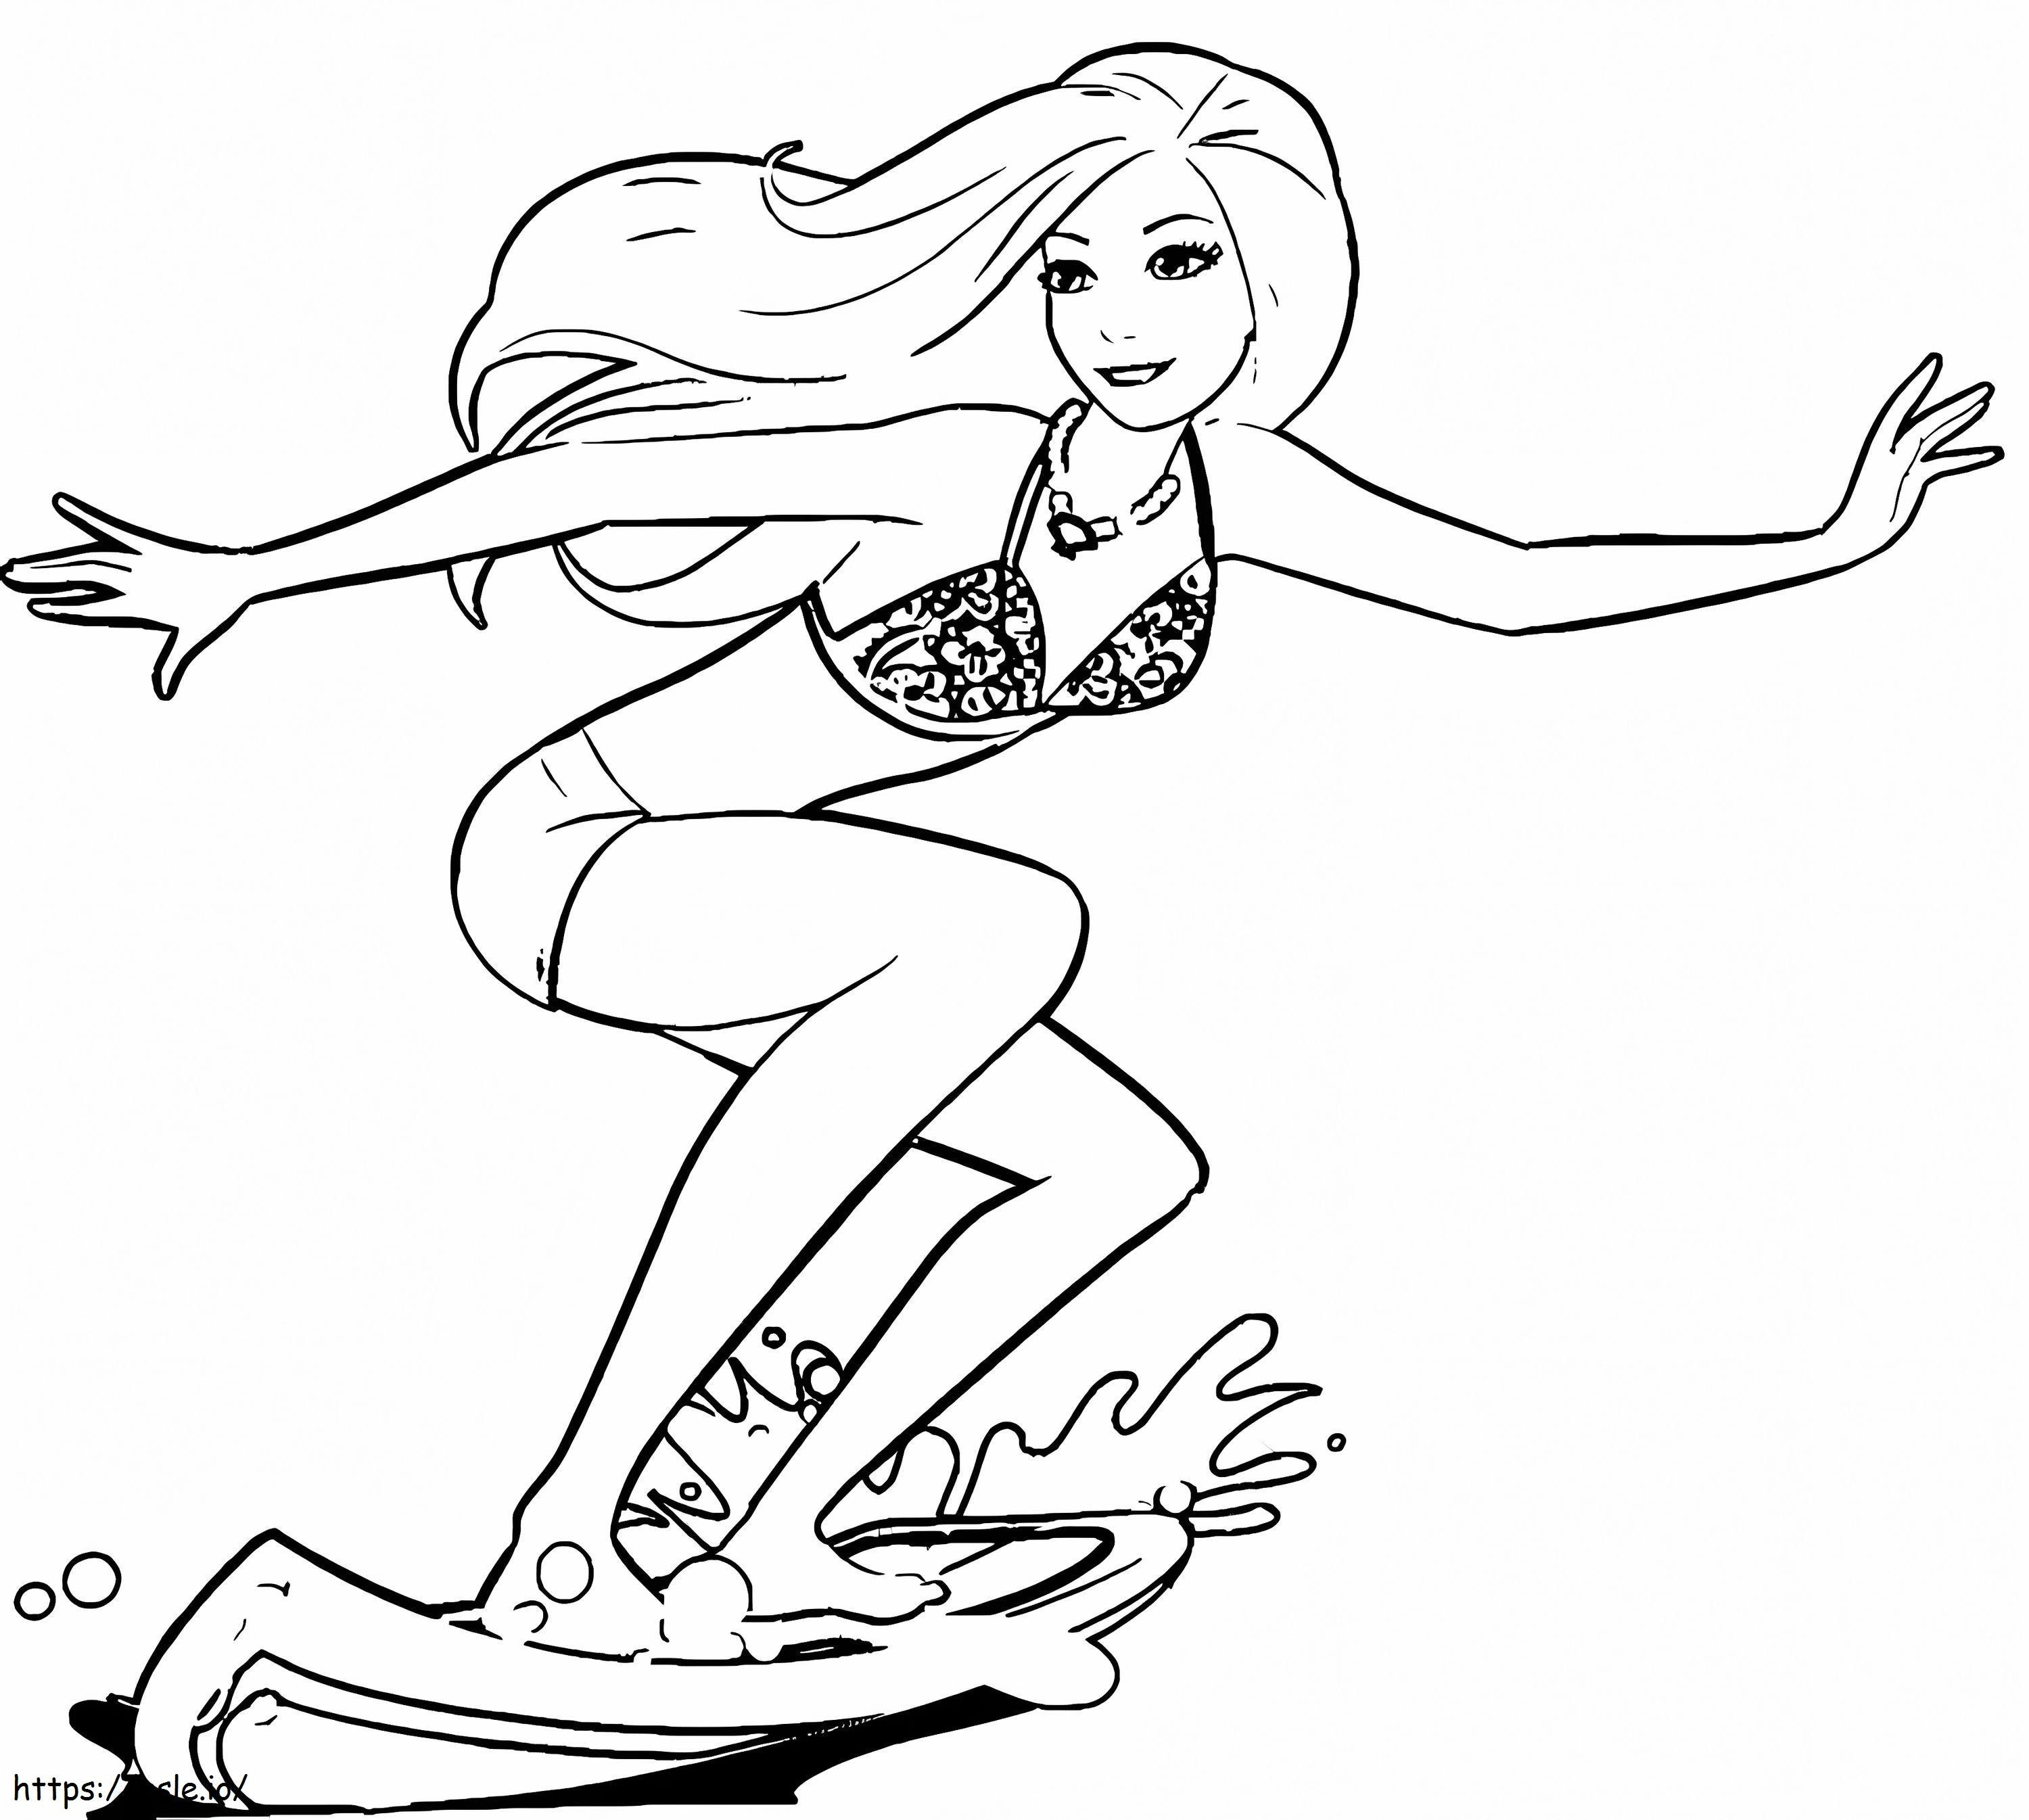 Barbie Surfing coloring page